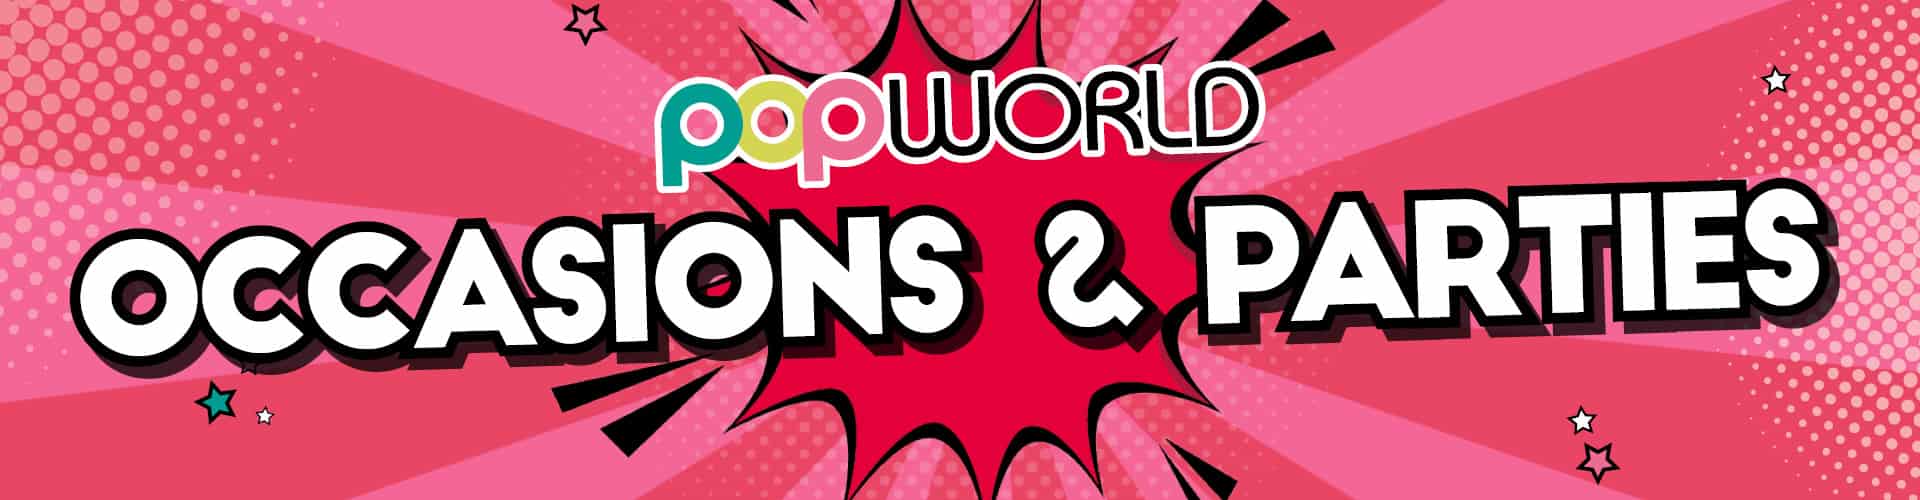 Occasions and Parties at Popworld Chelmsford